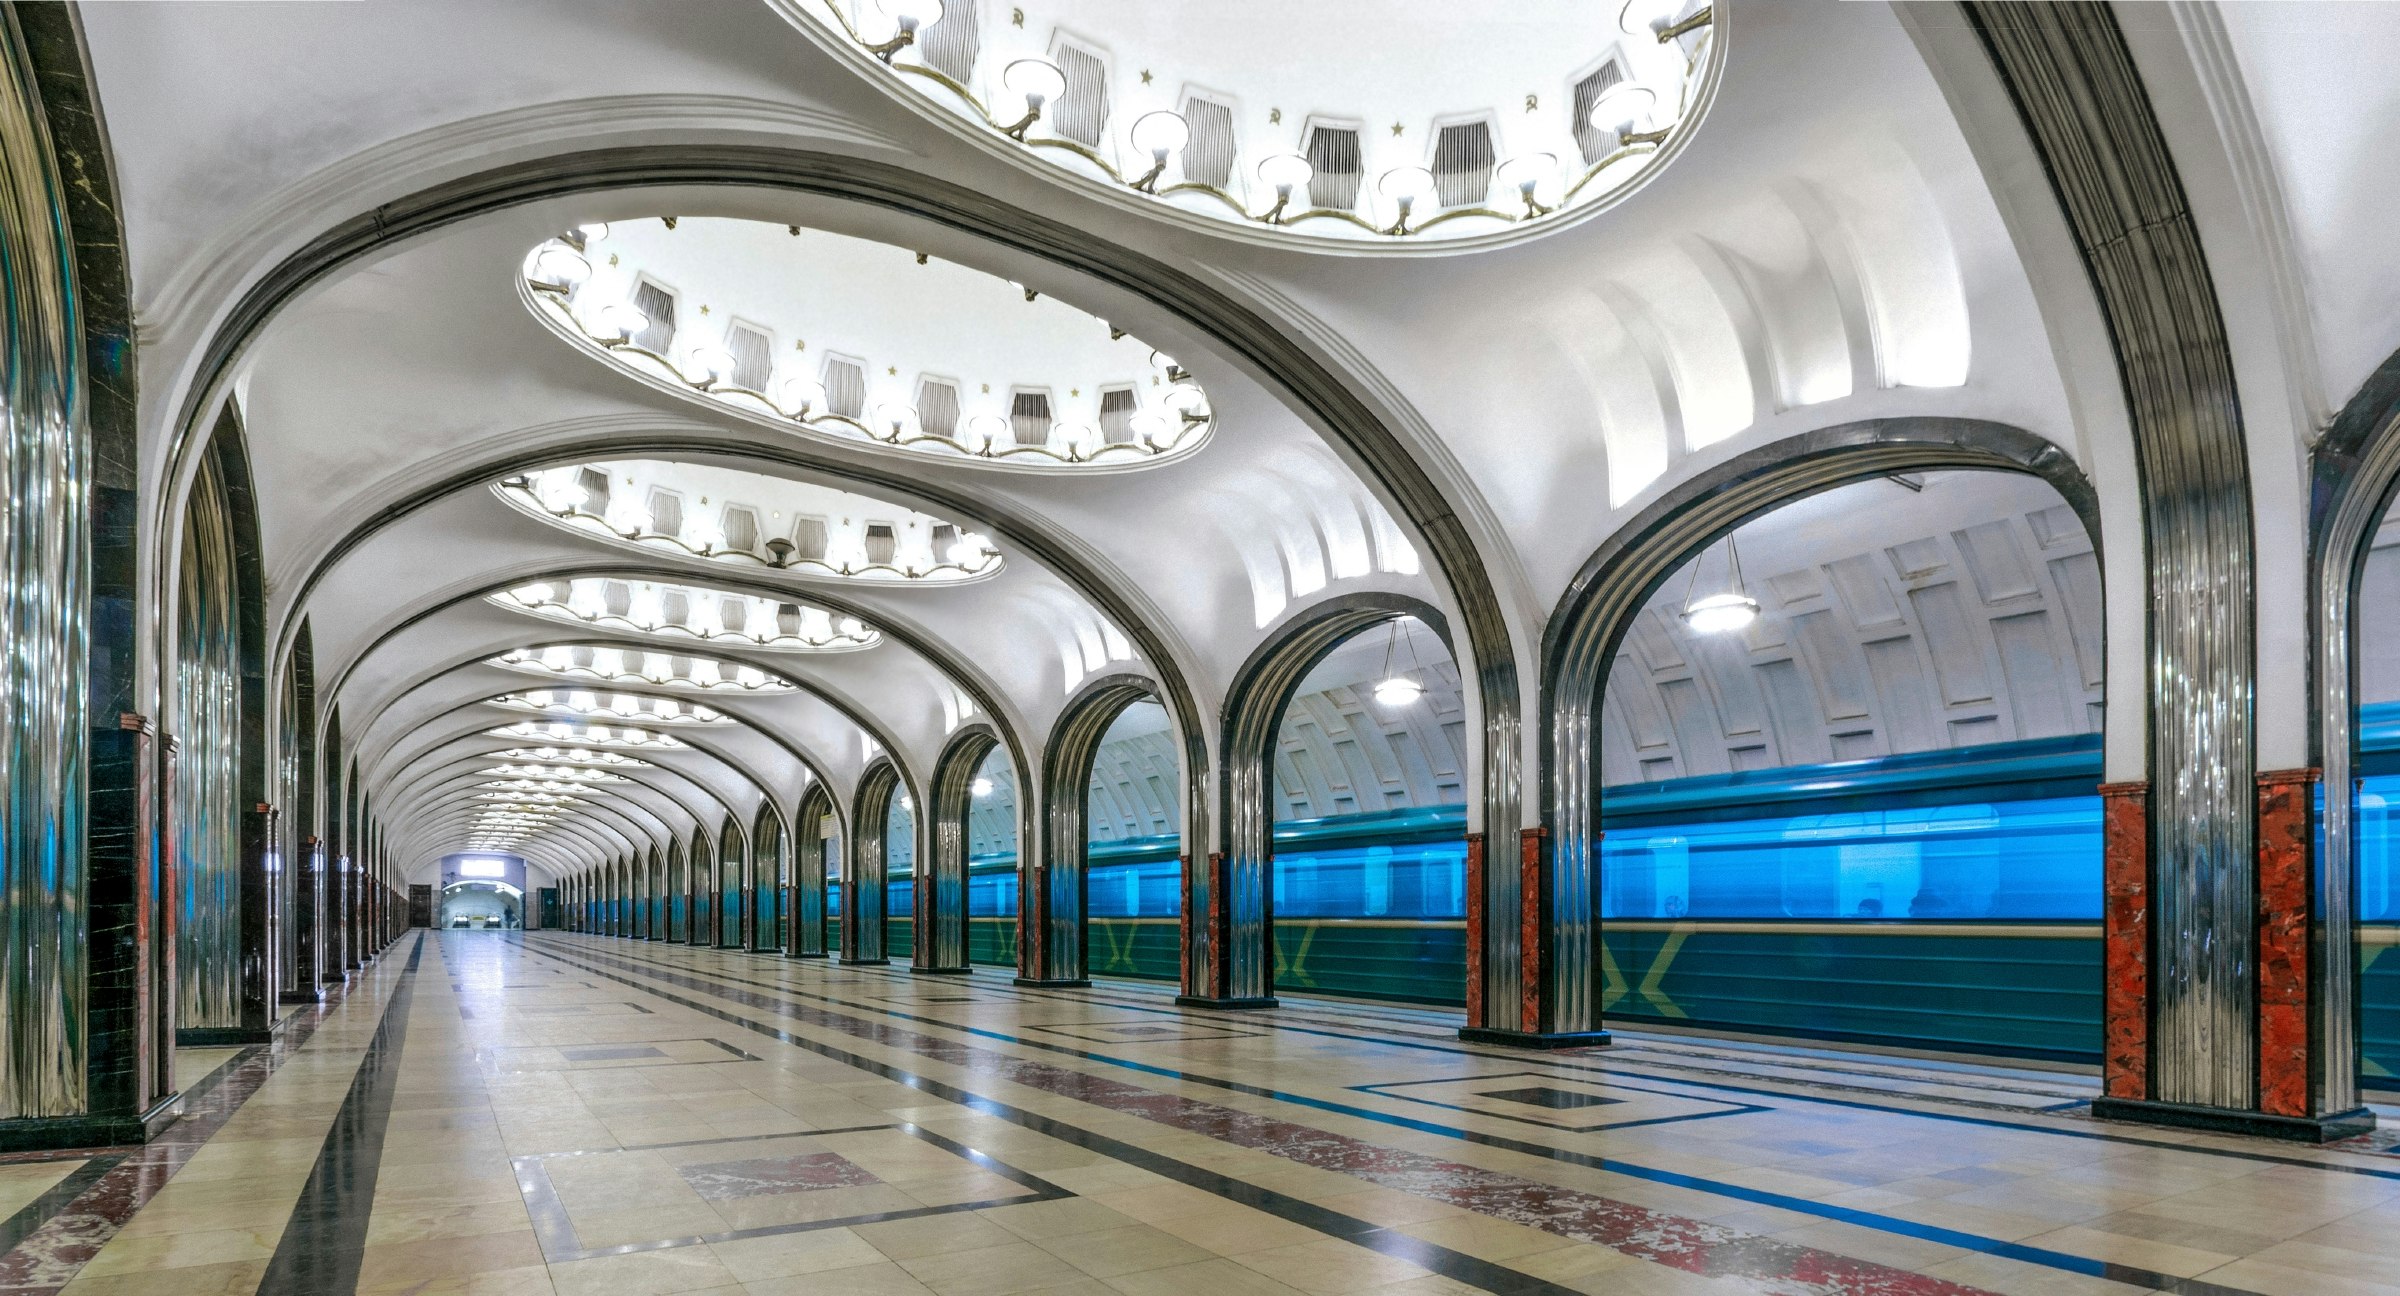 Travel News - 500px Photo ID: 104675197 - Considered to be one of the most beautiful in the system, it is a fine example of pre-World War II Stalinist Architecture and one of the most famous Metro stations in the world. The name as well as the design is a